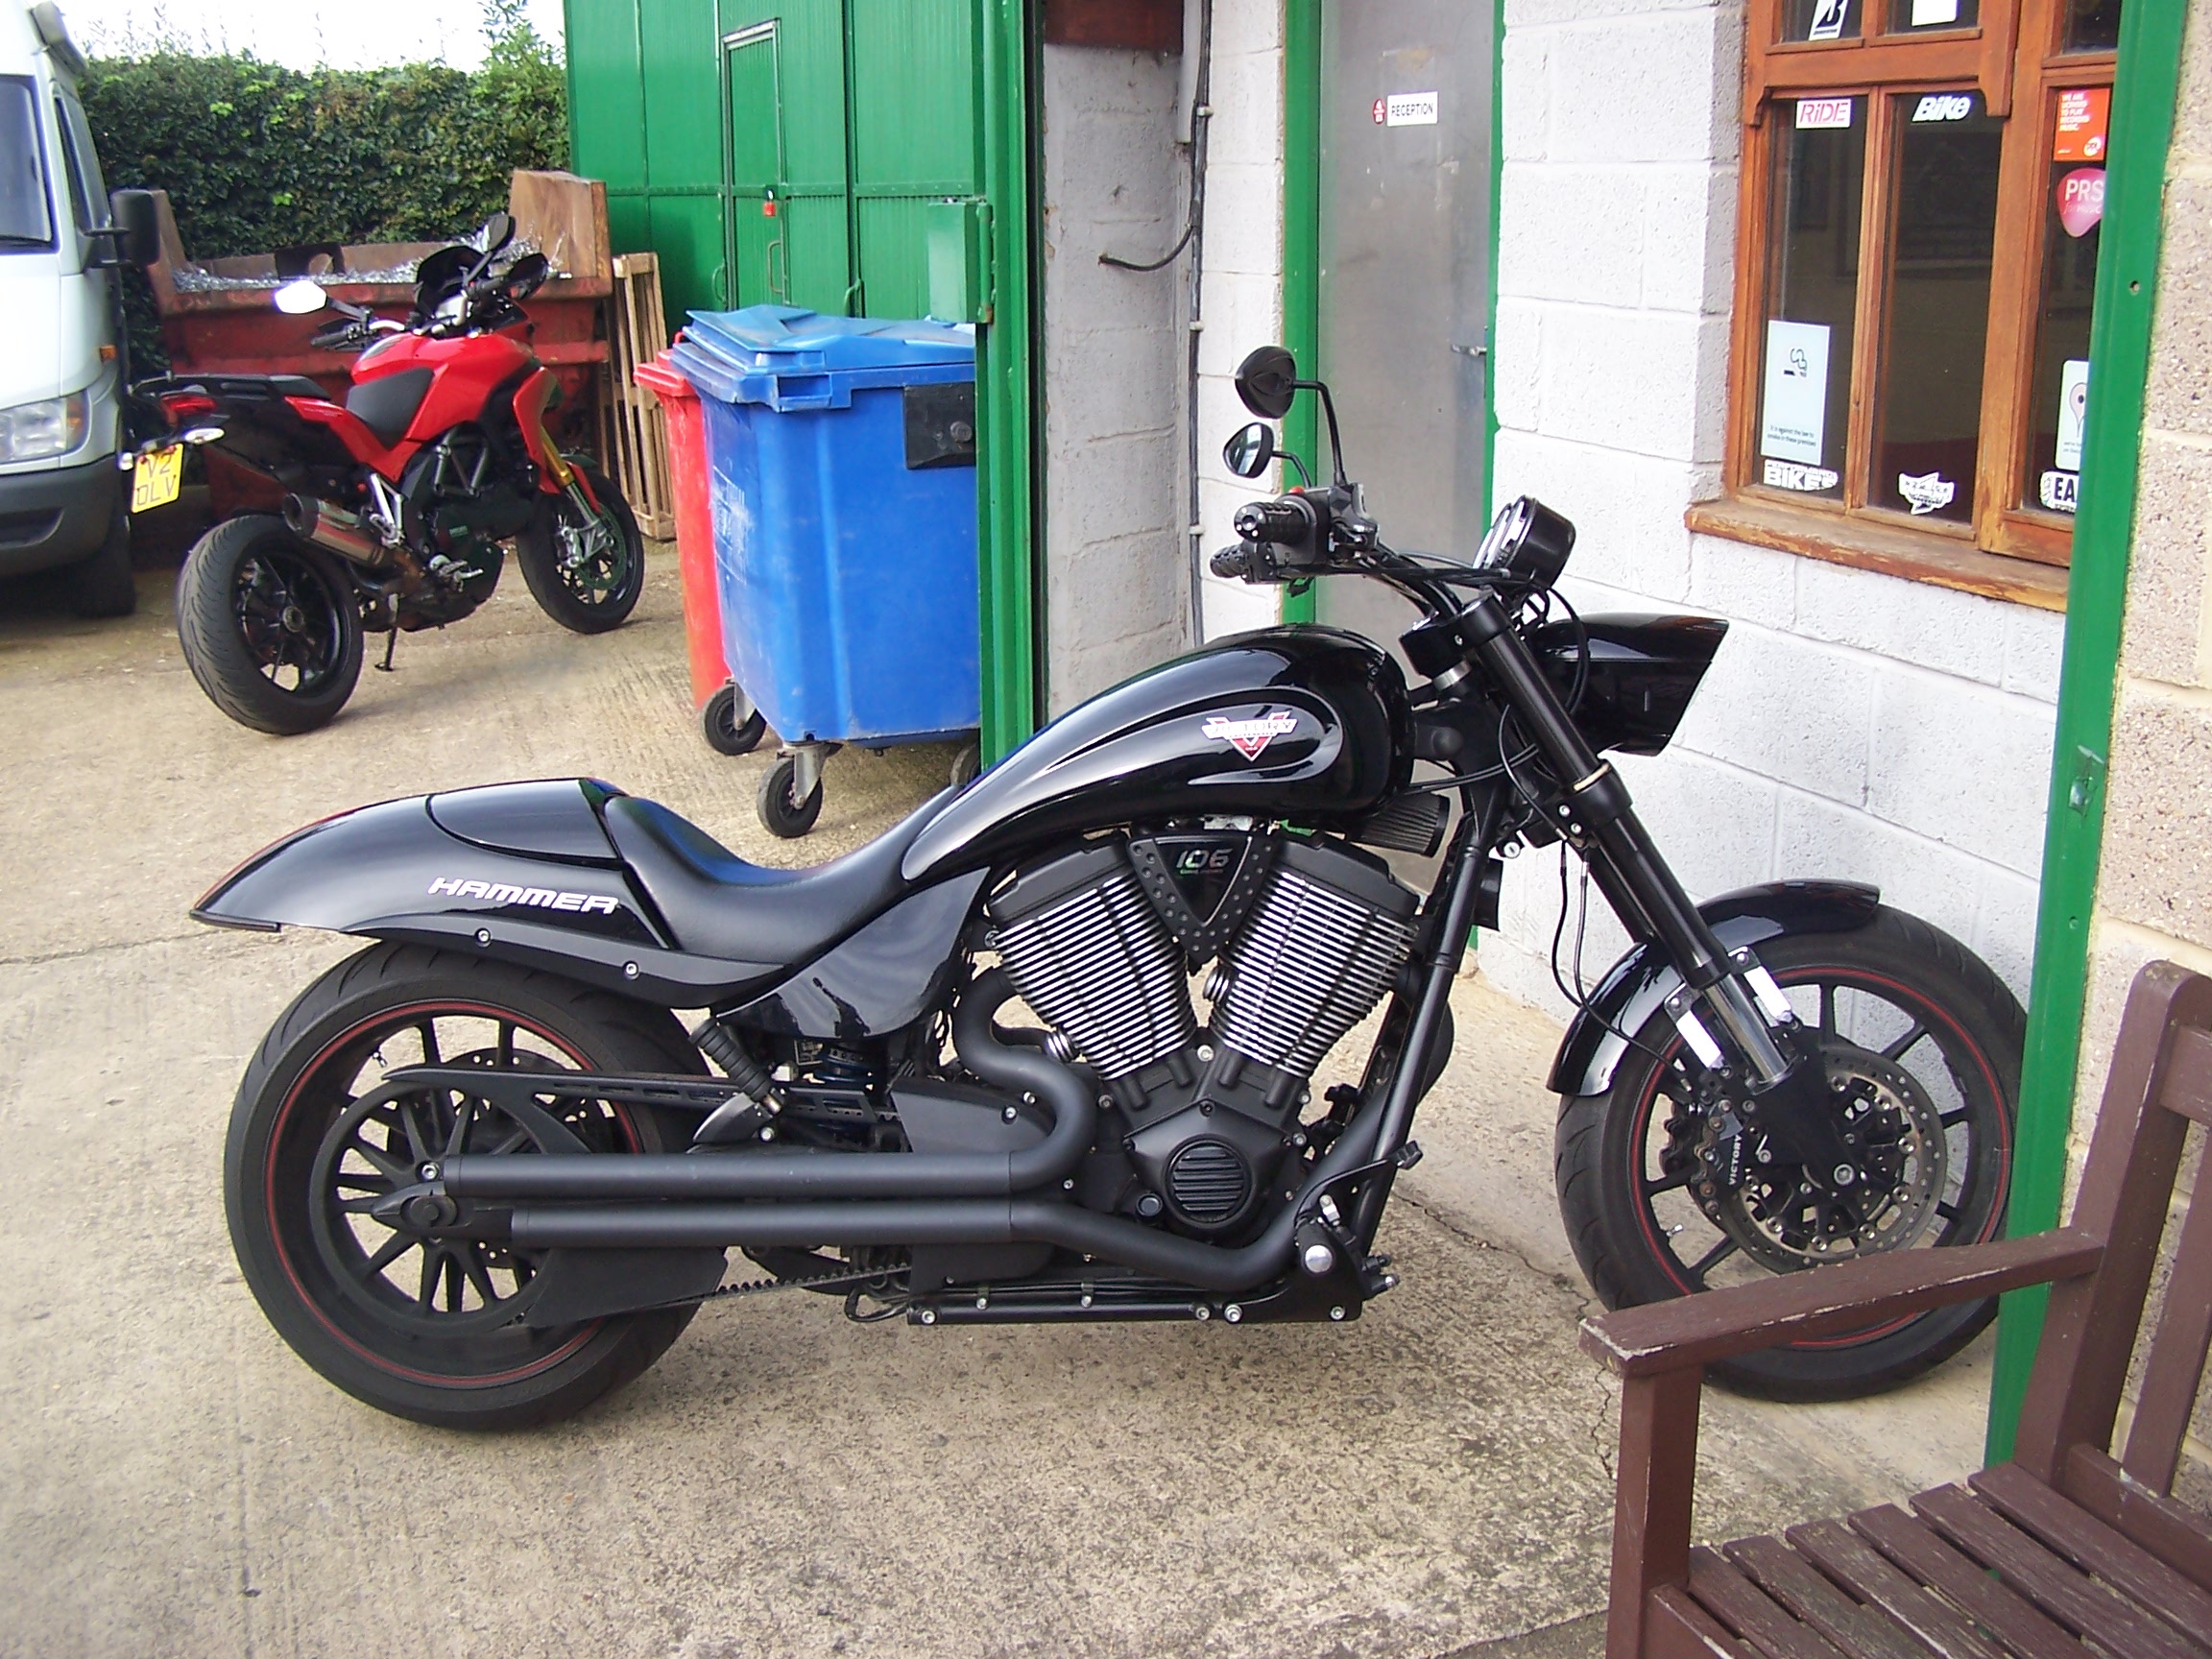 Victory Hammer S, fitted with induction tubes and Power Commander Dyno setup